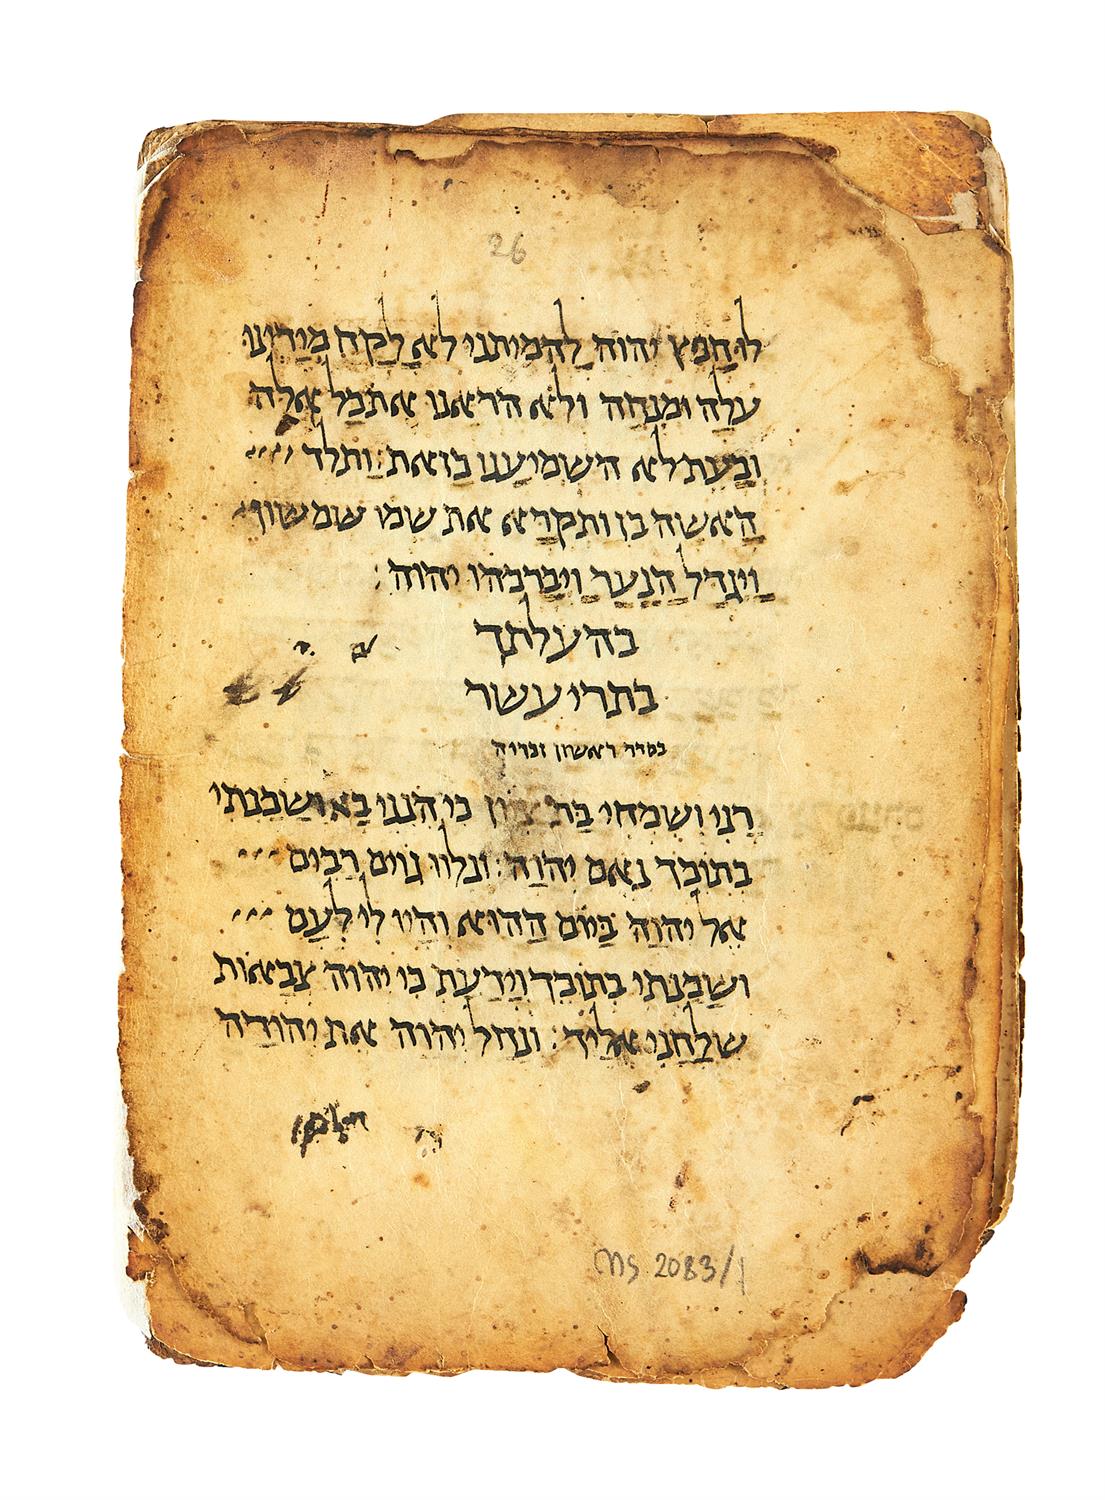 Ɵ Hebrew Bible, manuscript on parchment [Near East (Egypt or Palestine), 11th/12th century]